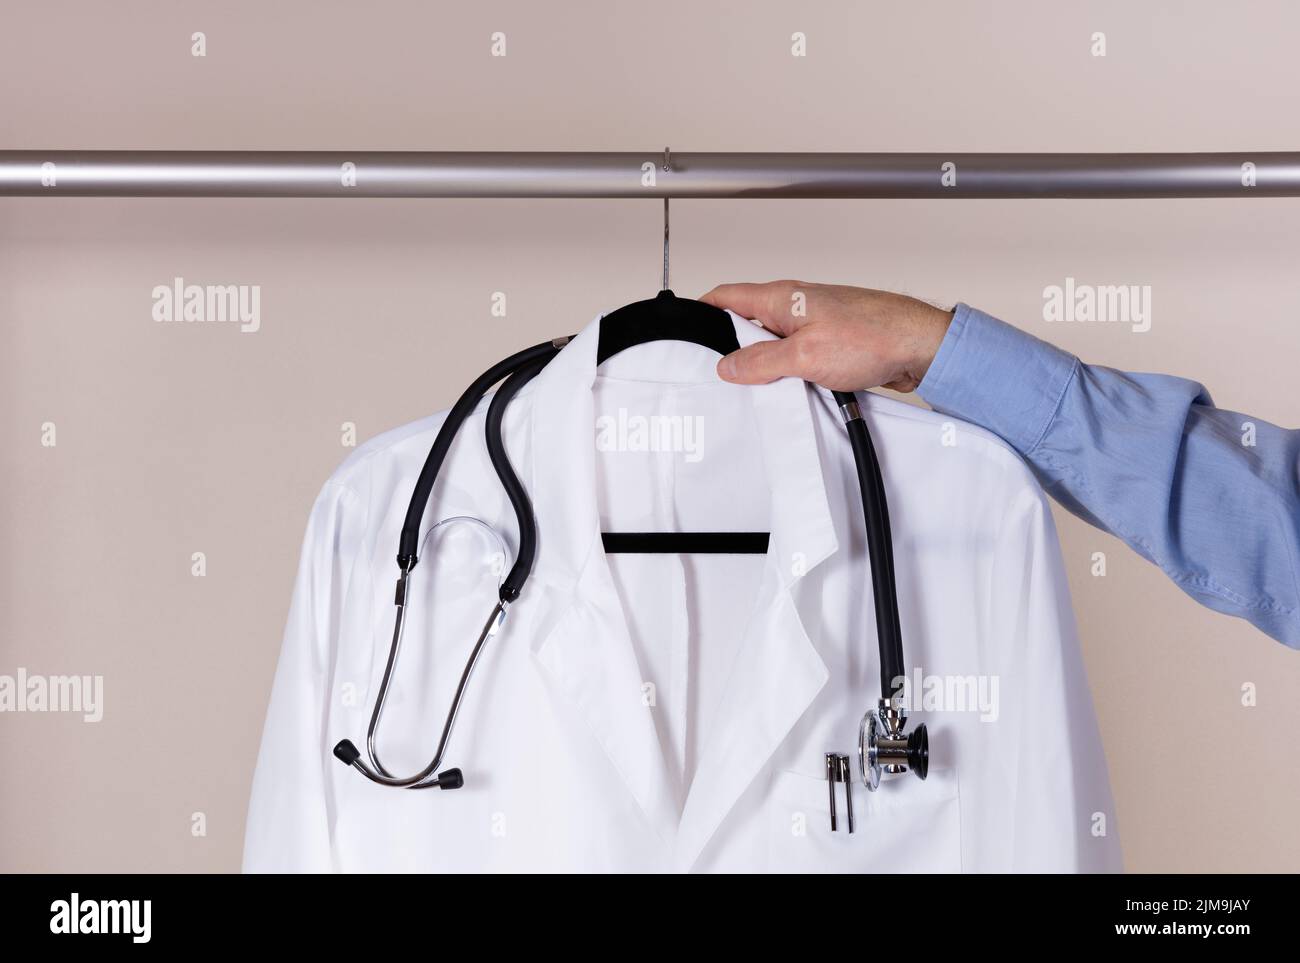 Medical white consultation coat with stethoscope being taken off rack by male doctor hand Stock Photo